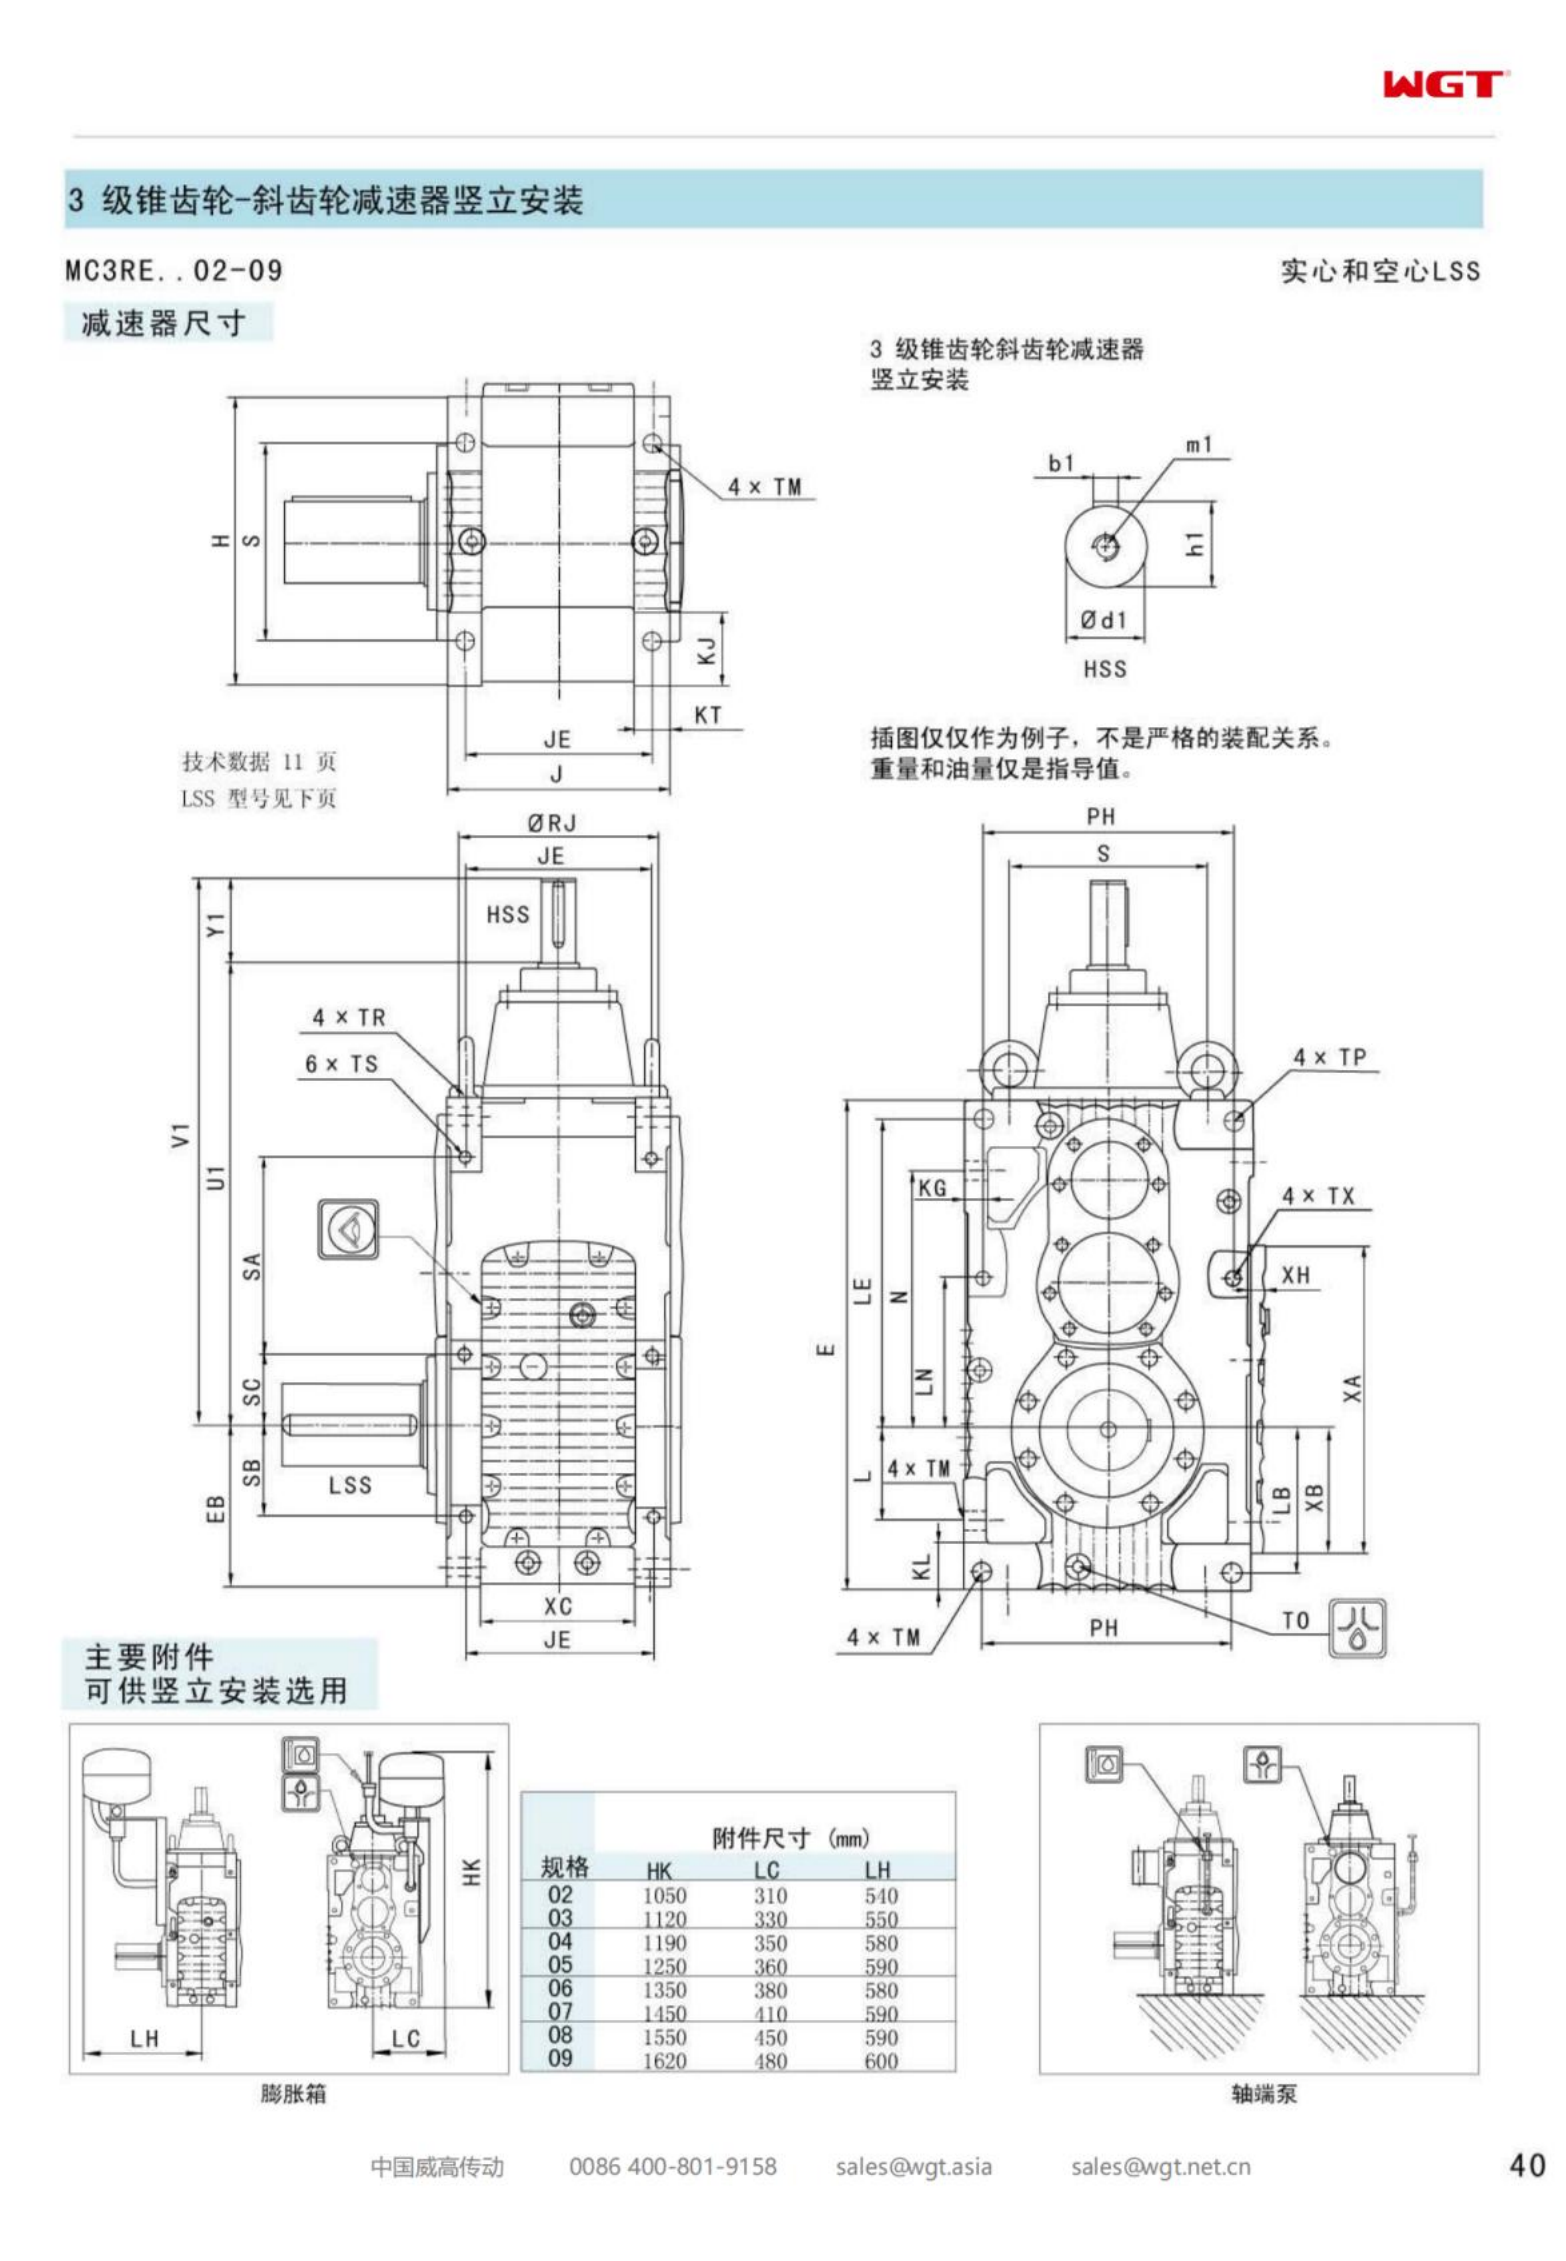 MC3RESF05 Replace_SEW_MC_Series Gearbox